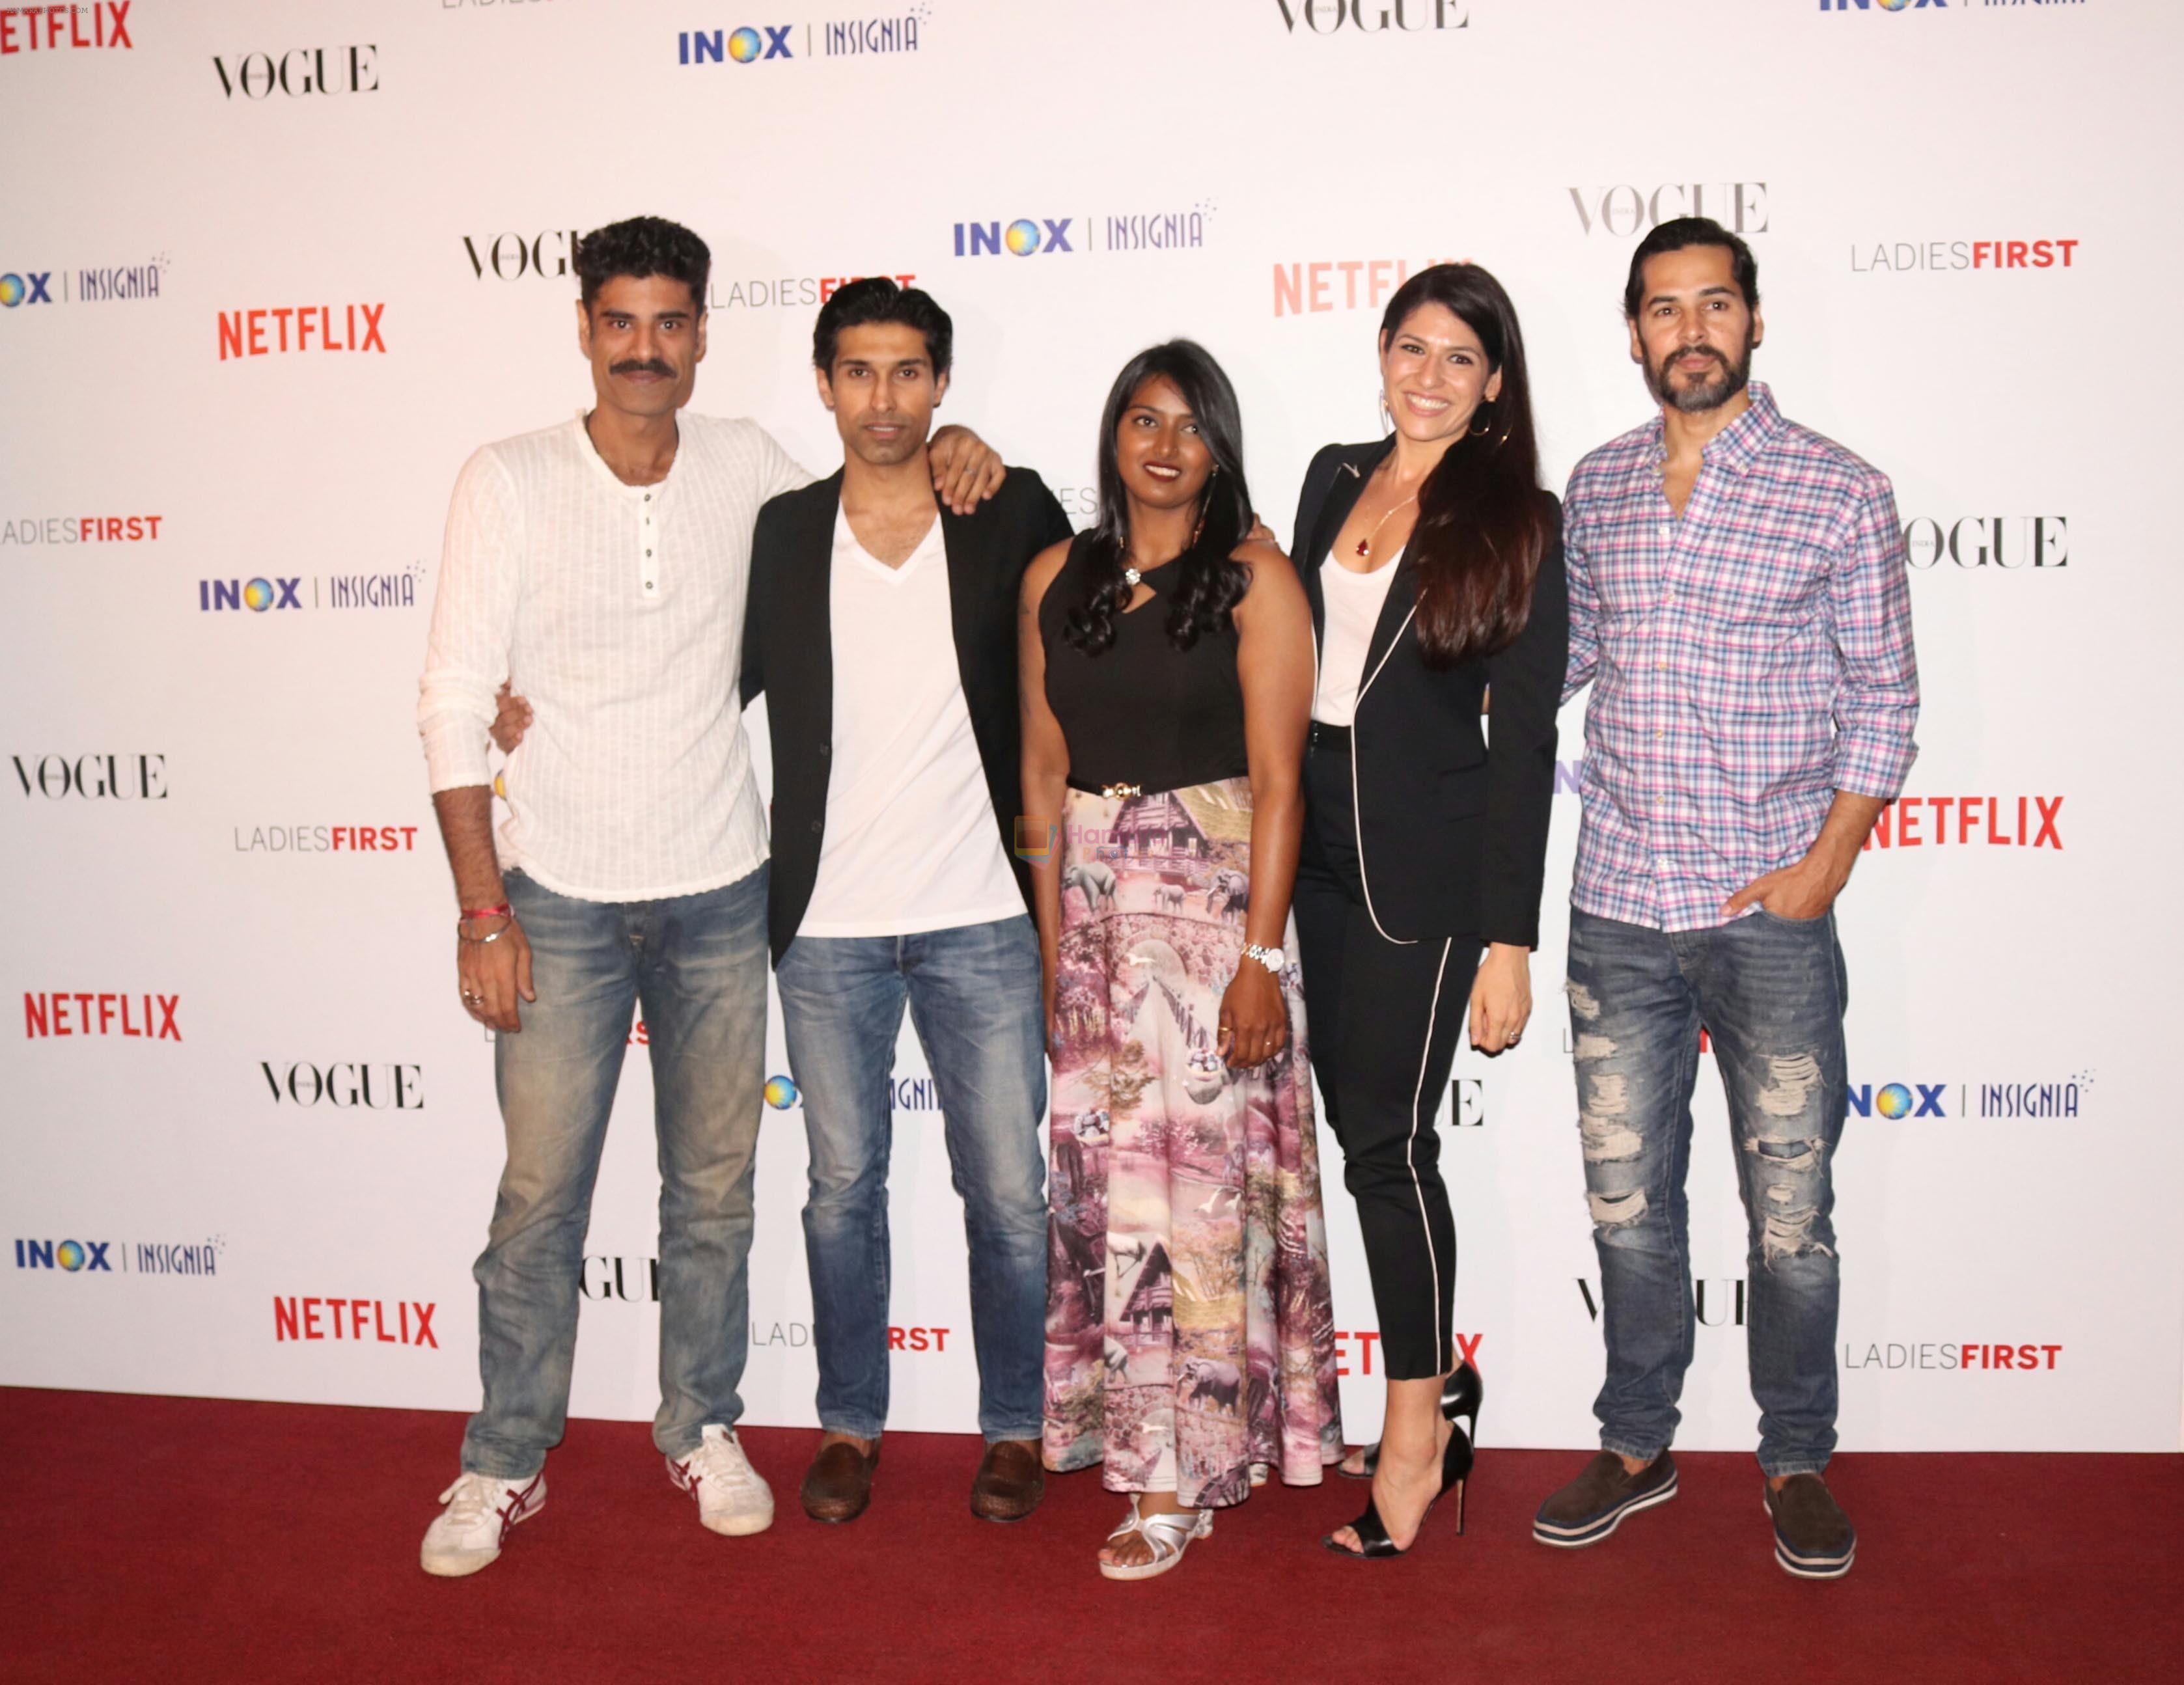 Sikandr Khr, Dino Morea at the Premier of _Ladies First_- The First Original Netflix Documentary that chronicles the life of World No 1 Archer, Deepika Kumari on 8th March 2018